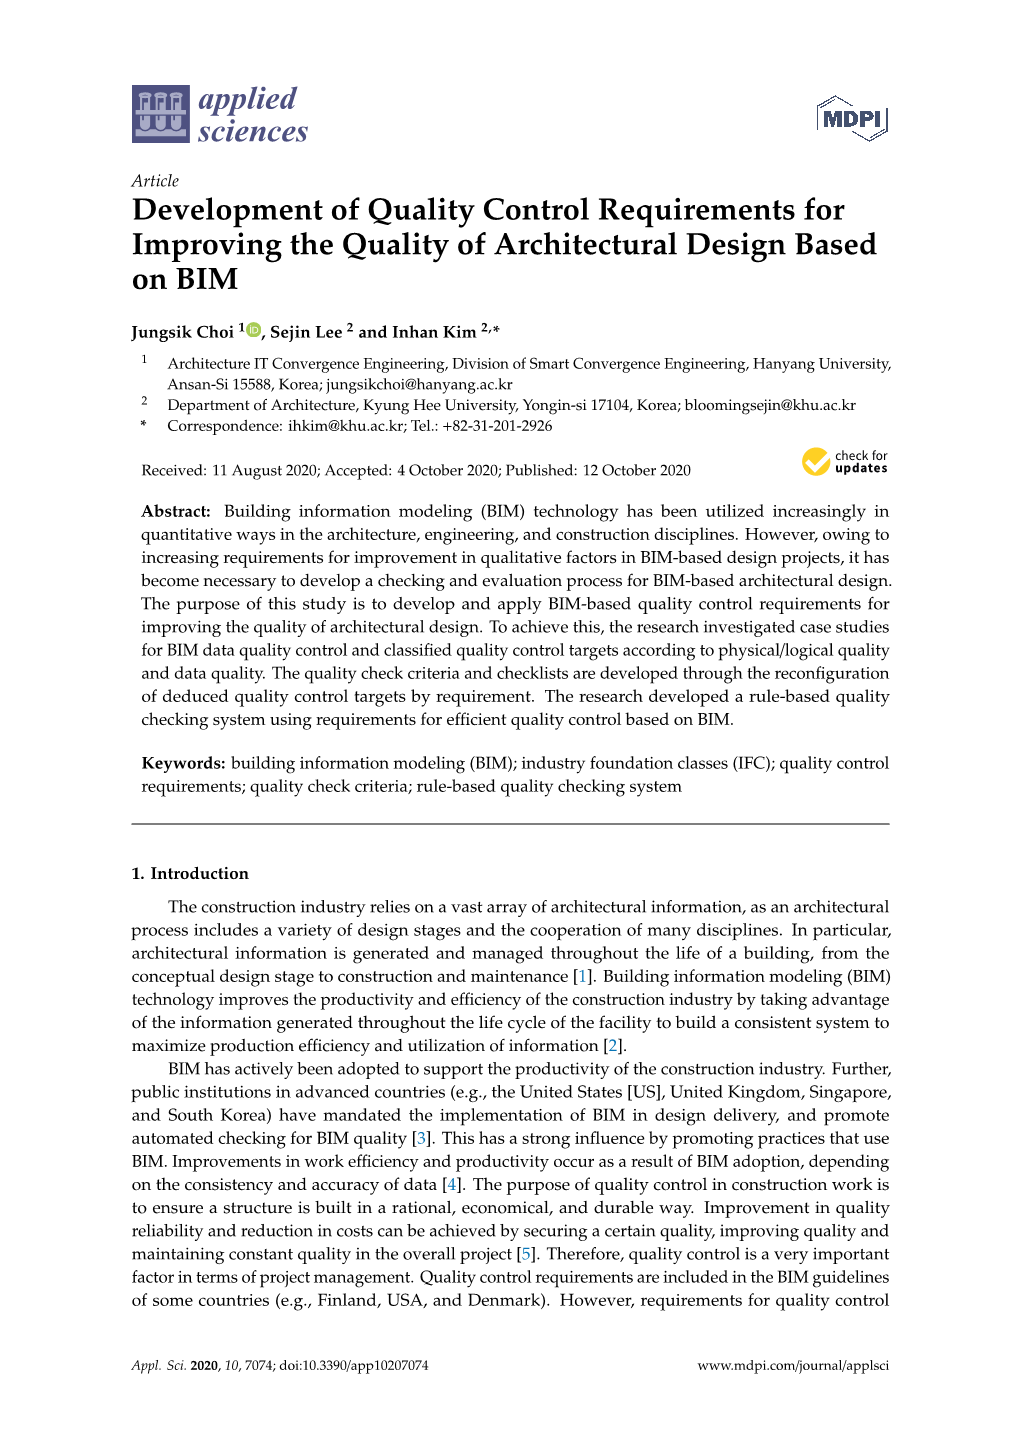 Development of Quality Control Requirements for Improving the Quality of Architectural Design Based on BIM